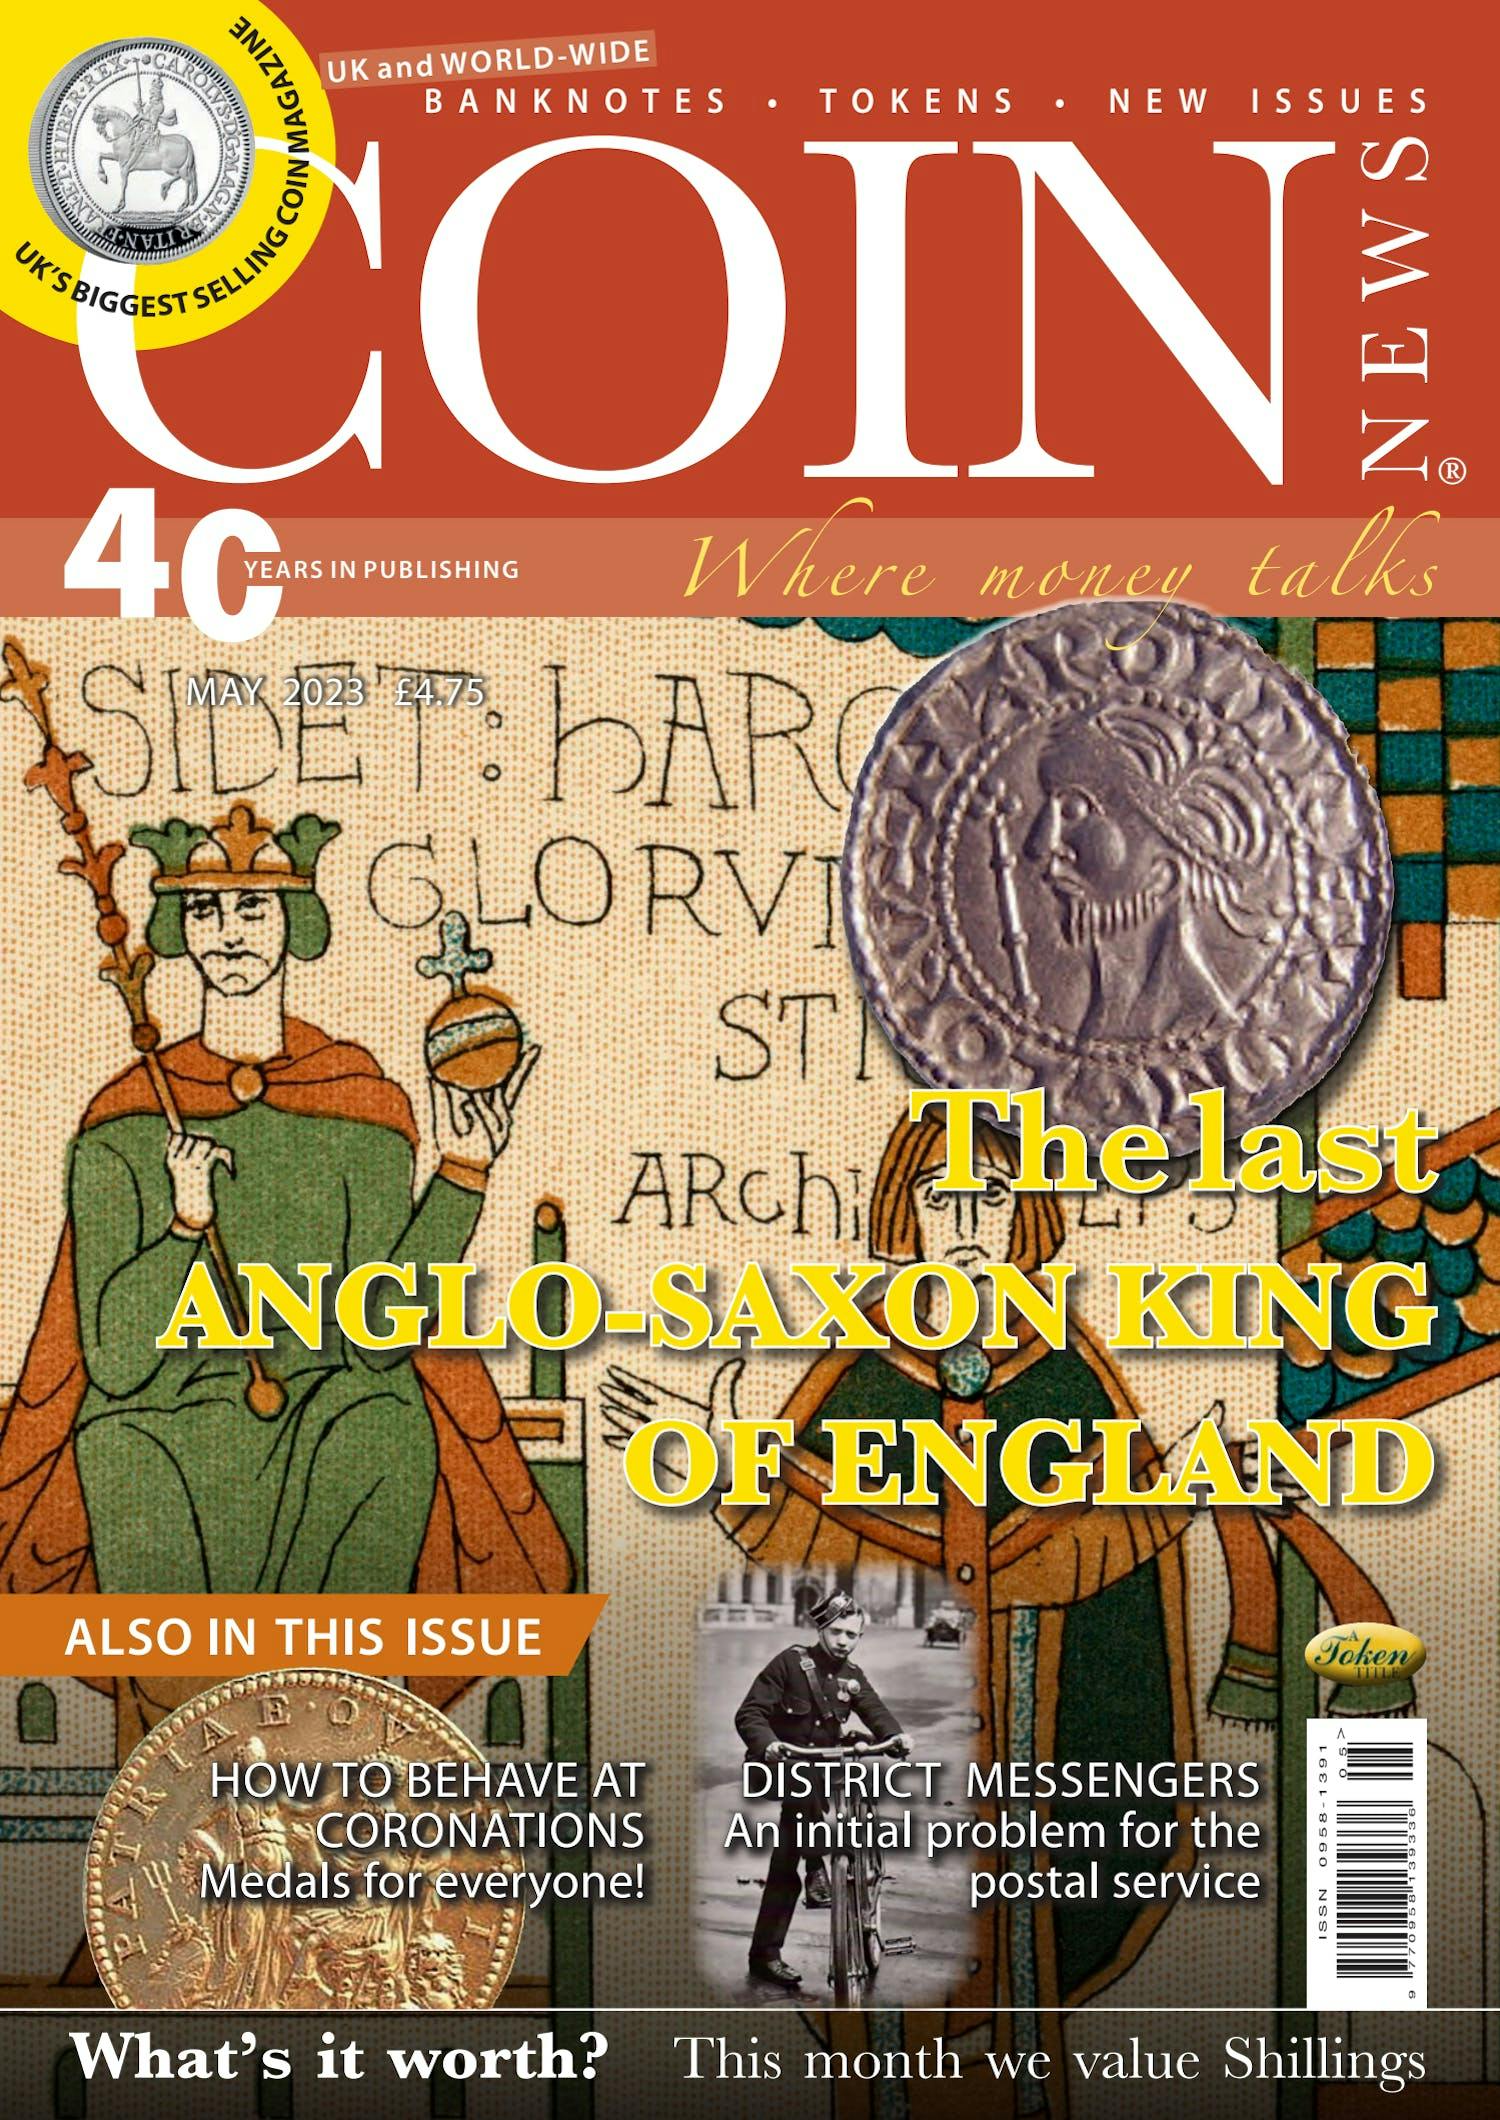 Front cover of 'The last Anglo-Saxon king', Coin News May 2023, Volume 60, Number 5 by Token Publishing